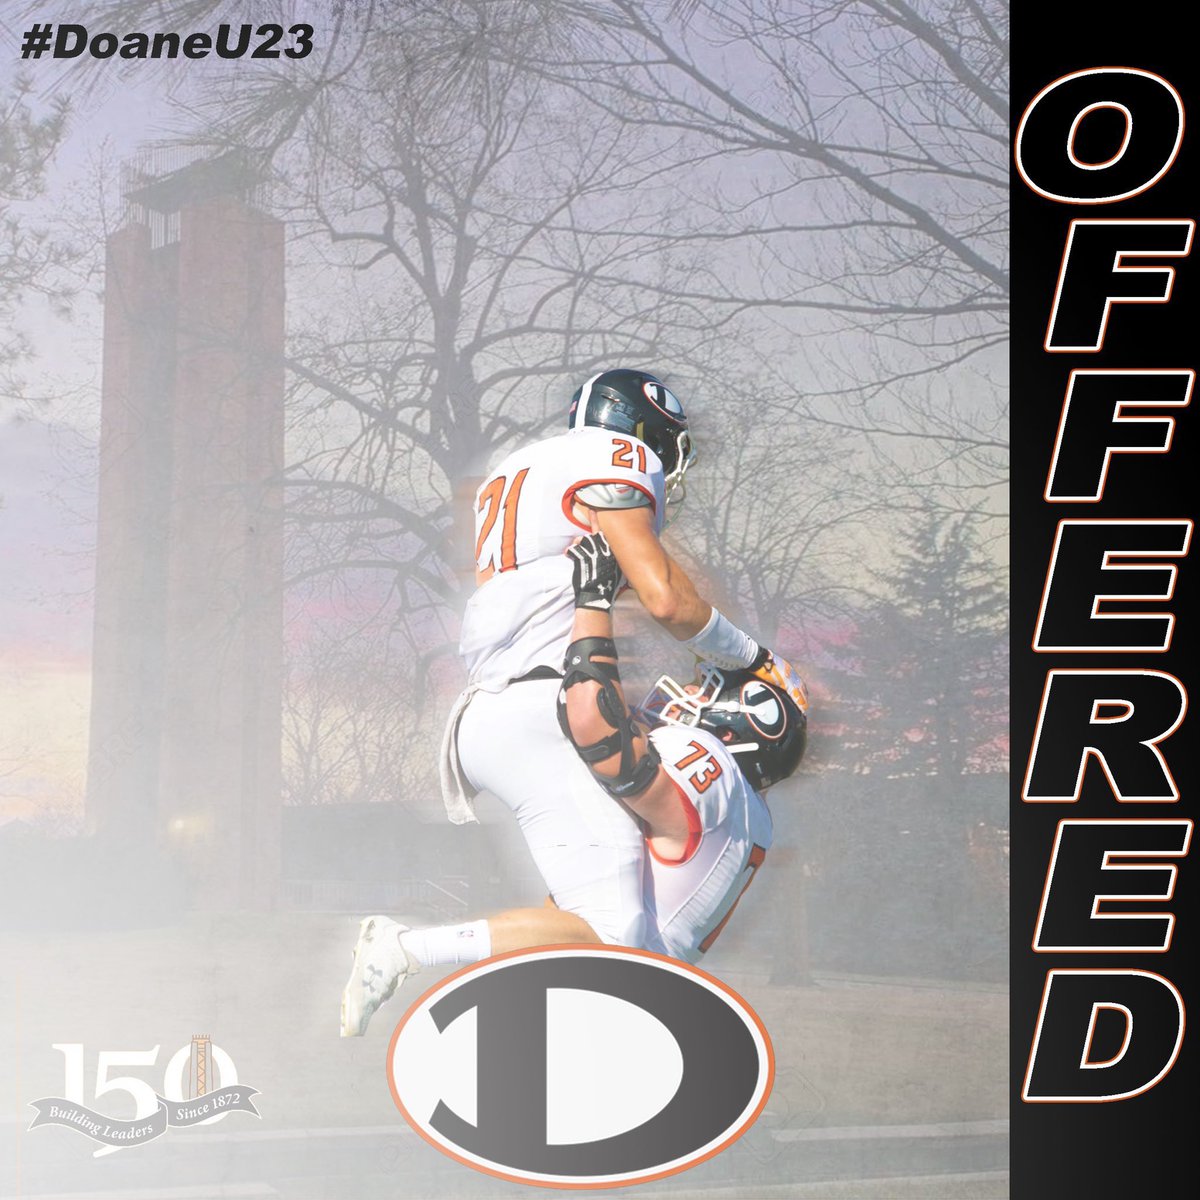 Blessed and honored to receive an offer from Doane University! @Kevinburnett_2 @BrianCyril36 @Coach_MDixon @BesslerChris @larryblustein